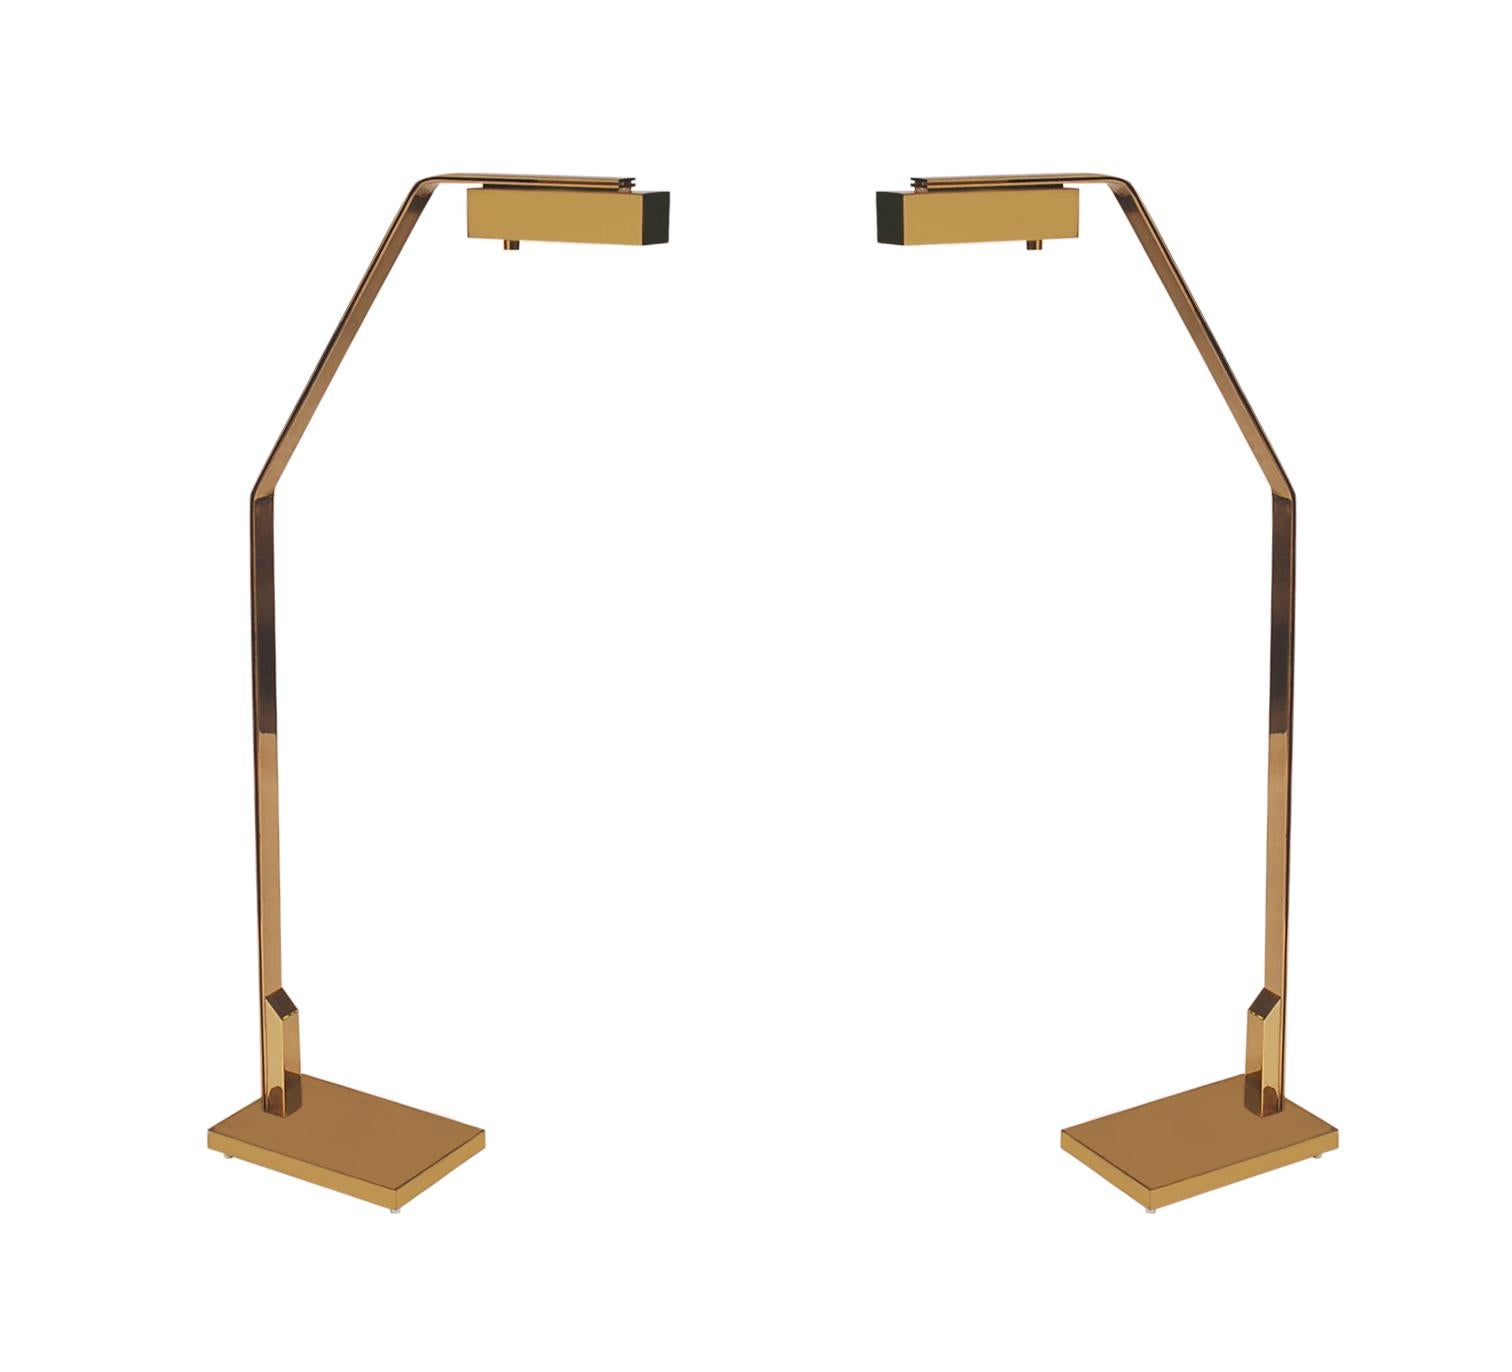 Late 20th Century Pair of Midcentury Italian Modern Polished Brass Reading Floor Lamps by Casella